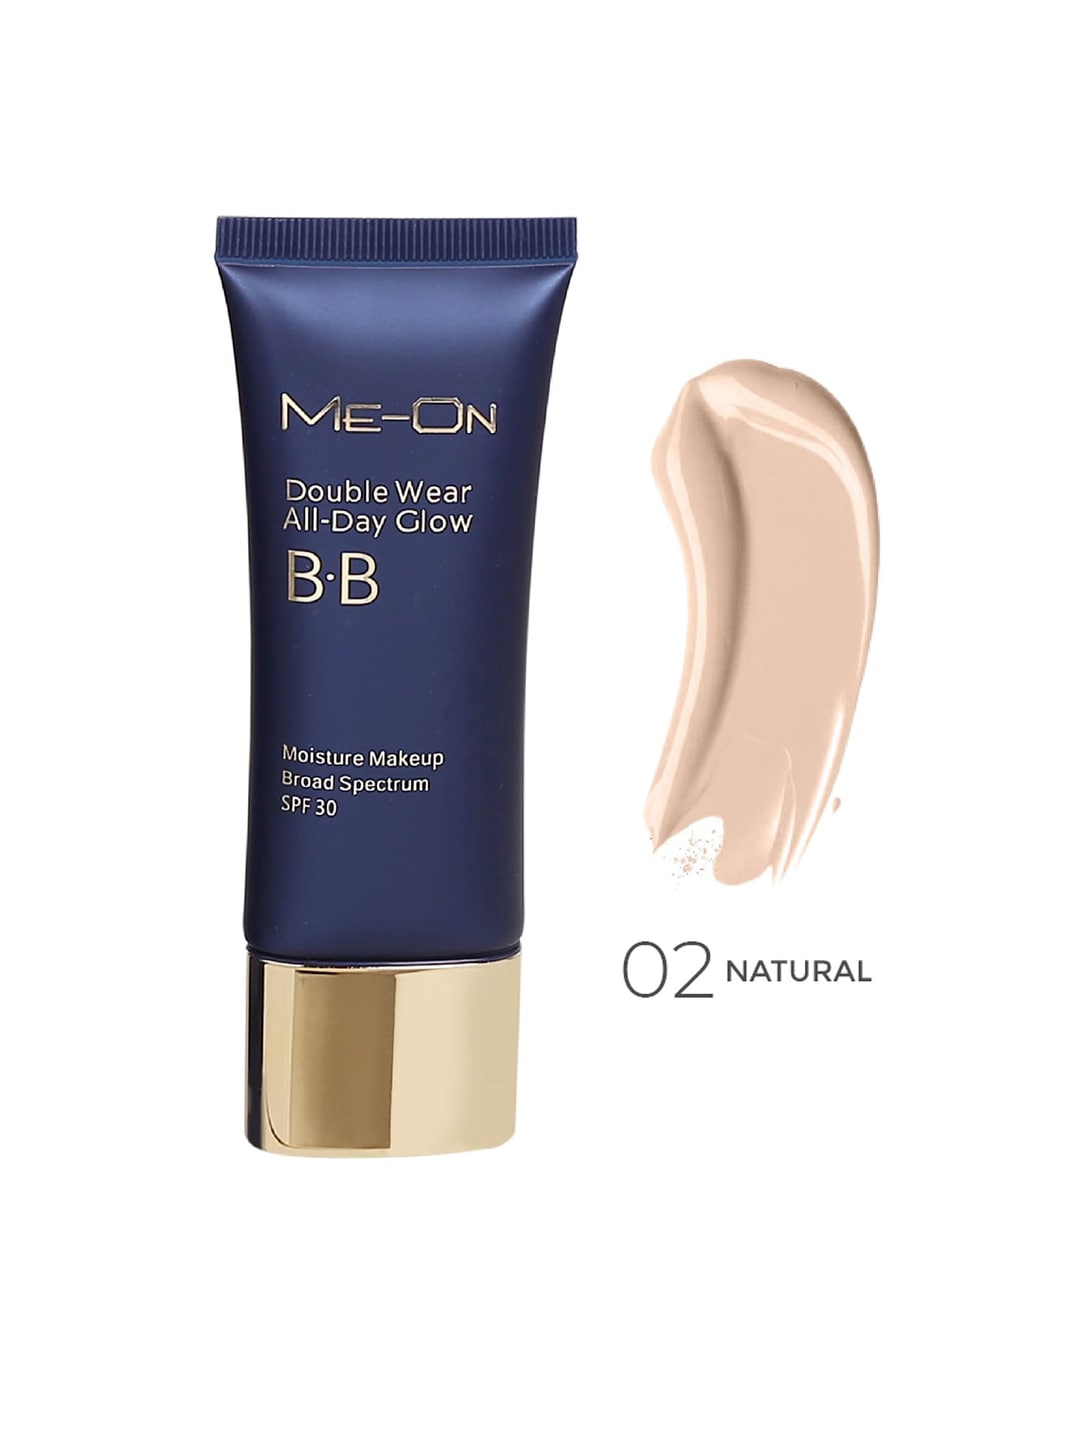 ME-ON Women New BB Foundation - 02 38gm Price in India